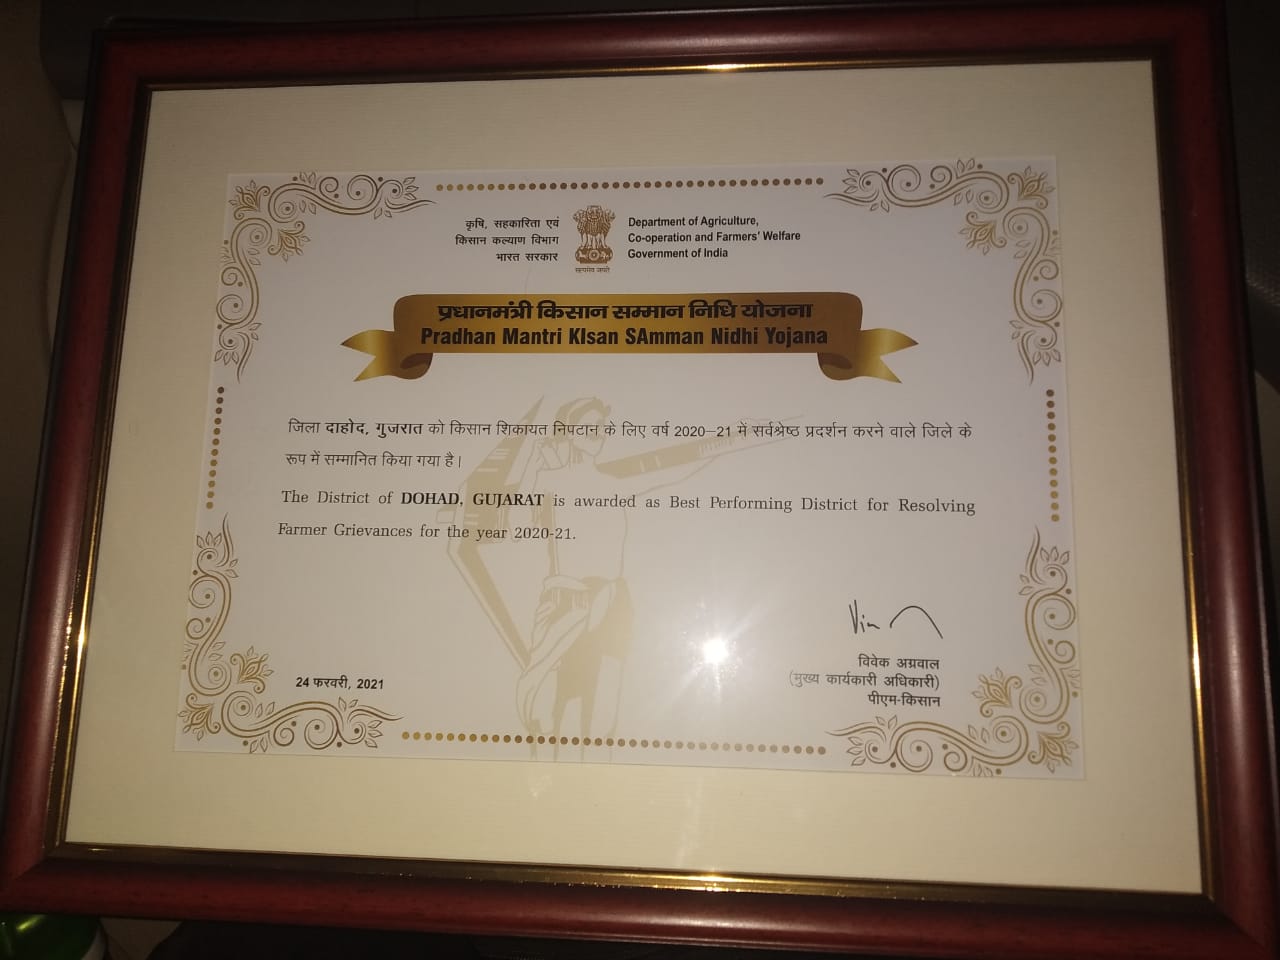 Dahod received the Central Award for Best Performance